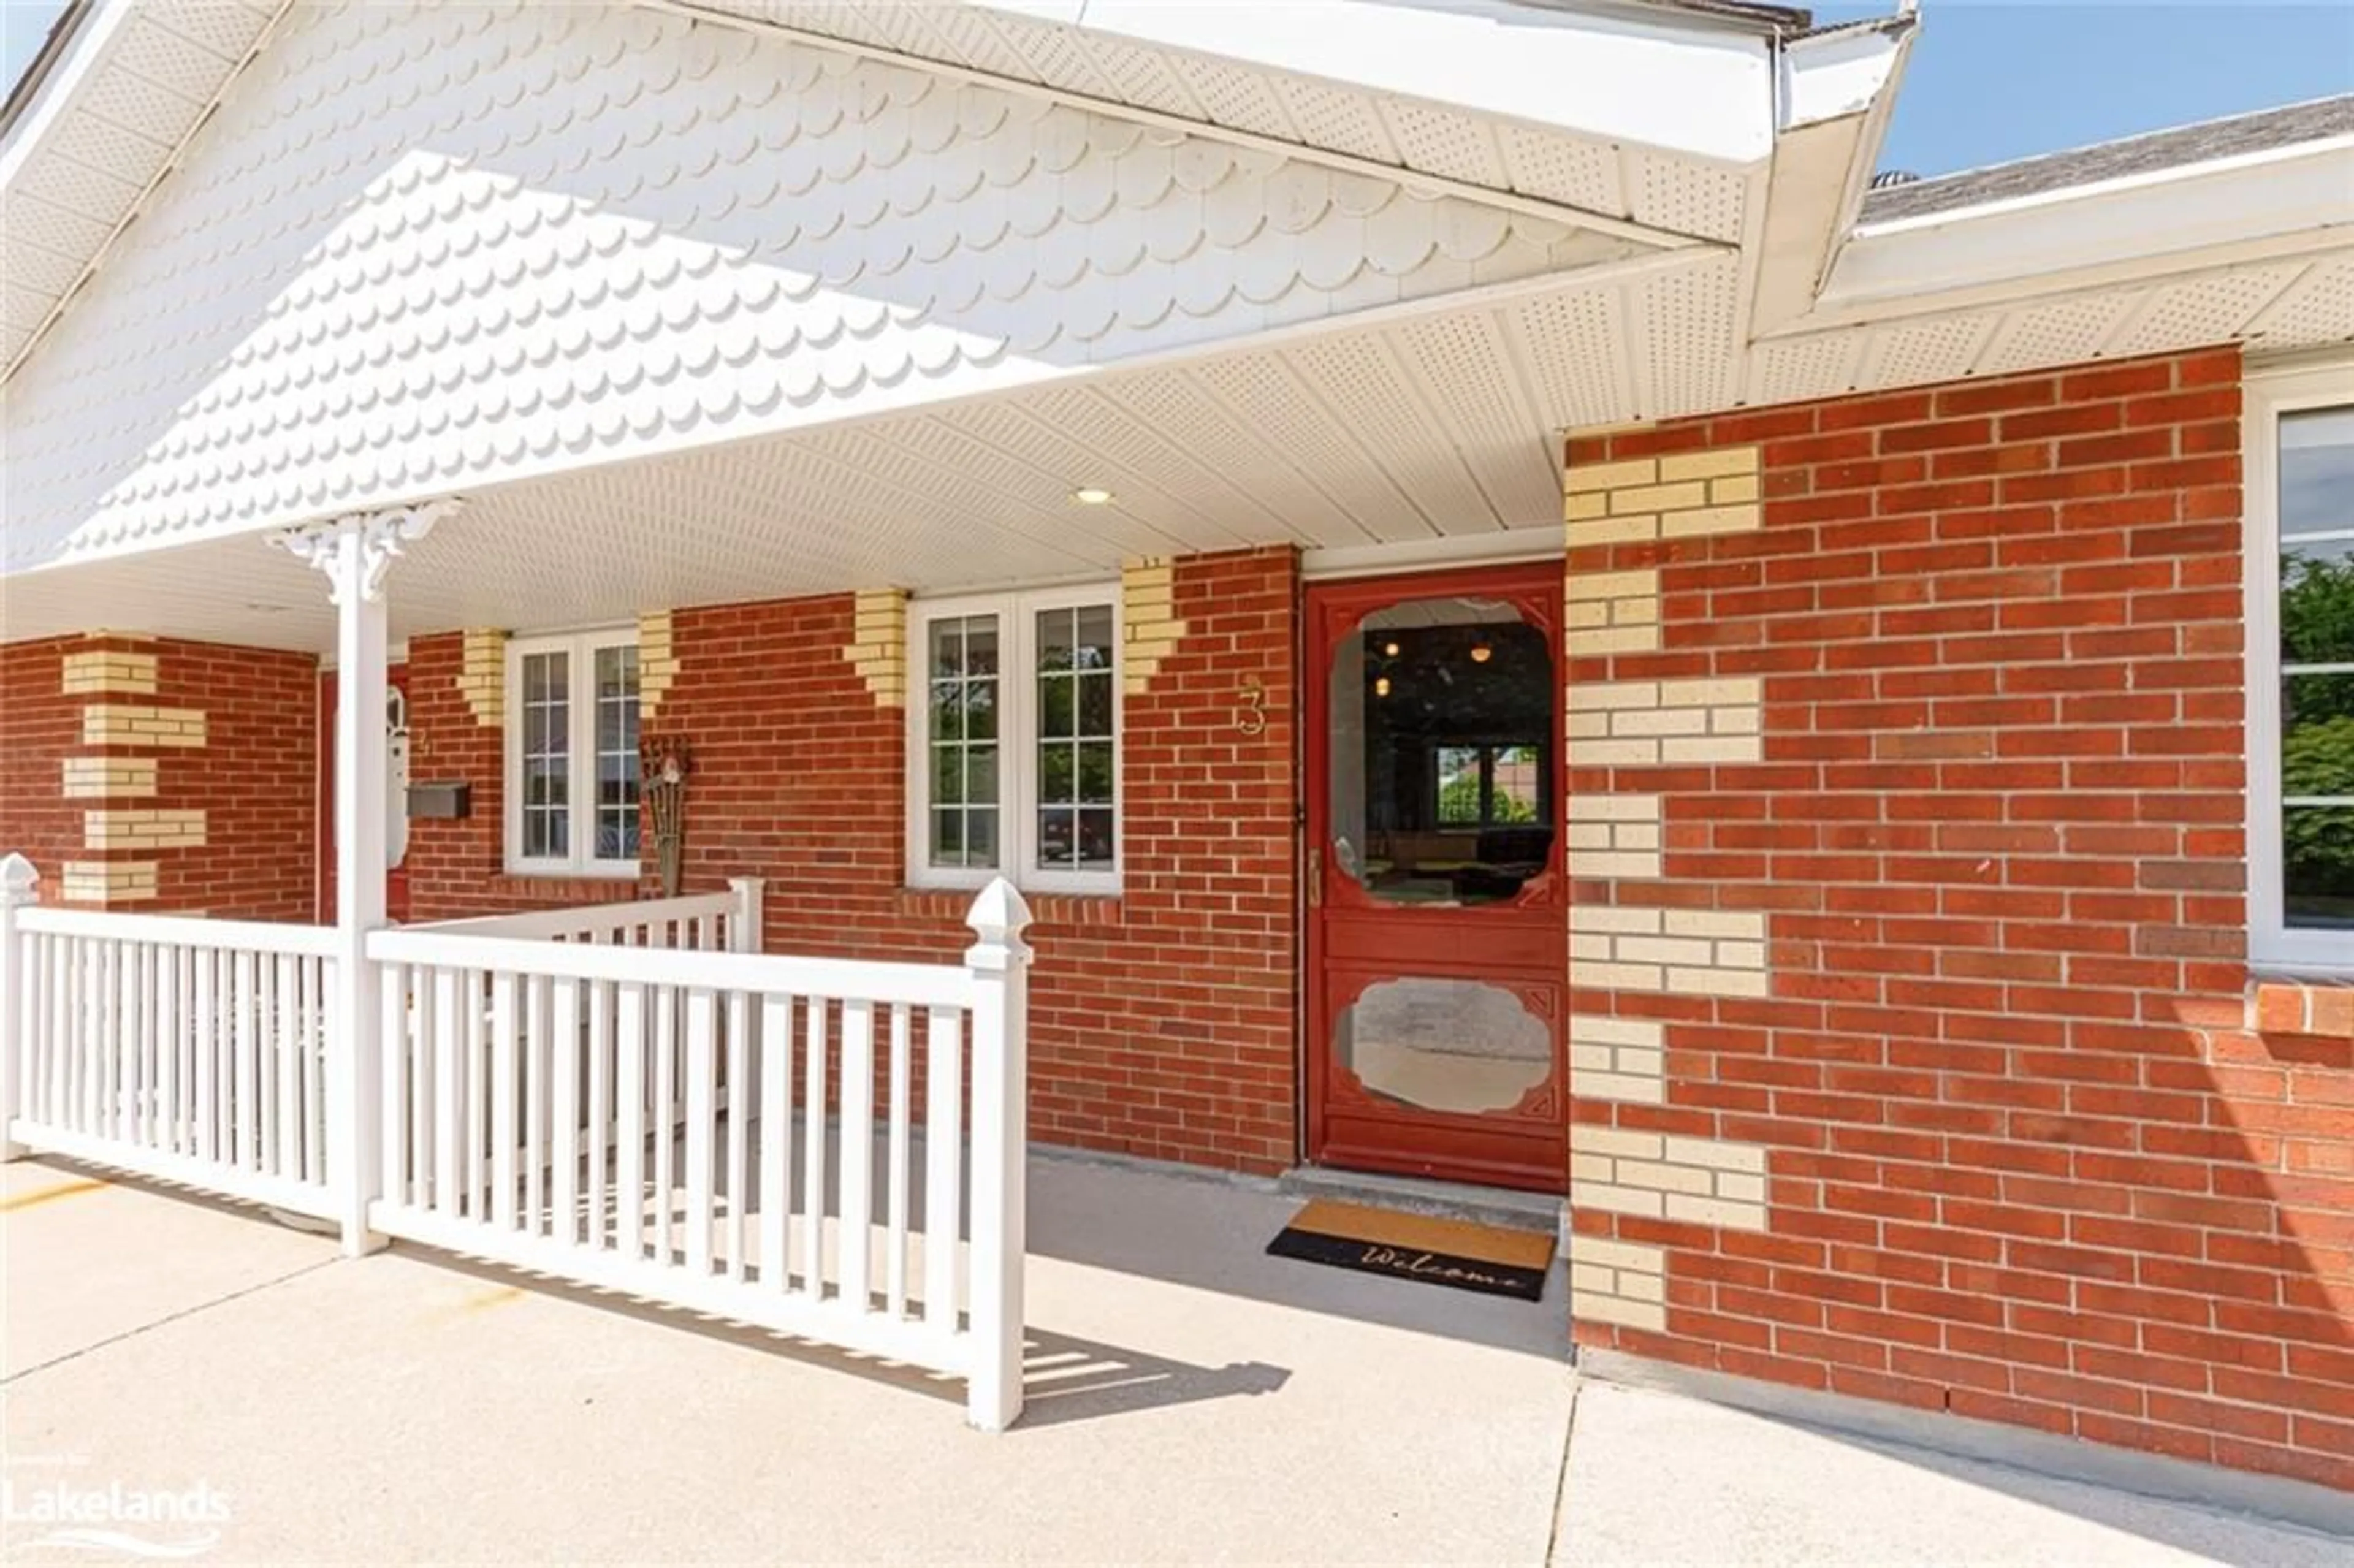 Home with brick exterior material for 346 Peel St #3, Collingwood Ontario L9Y 3W4